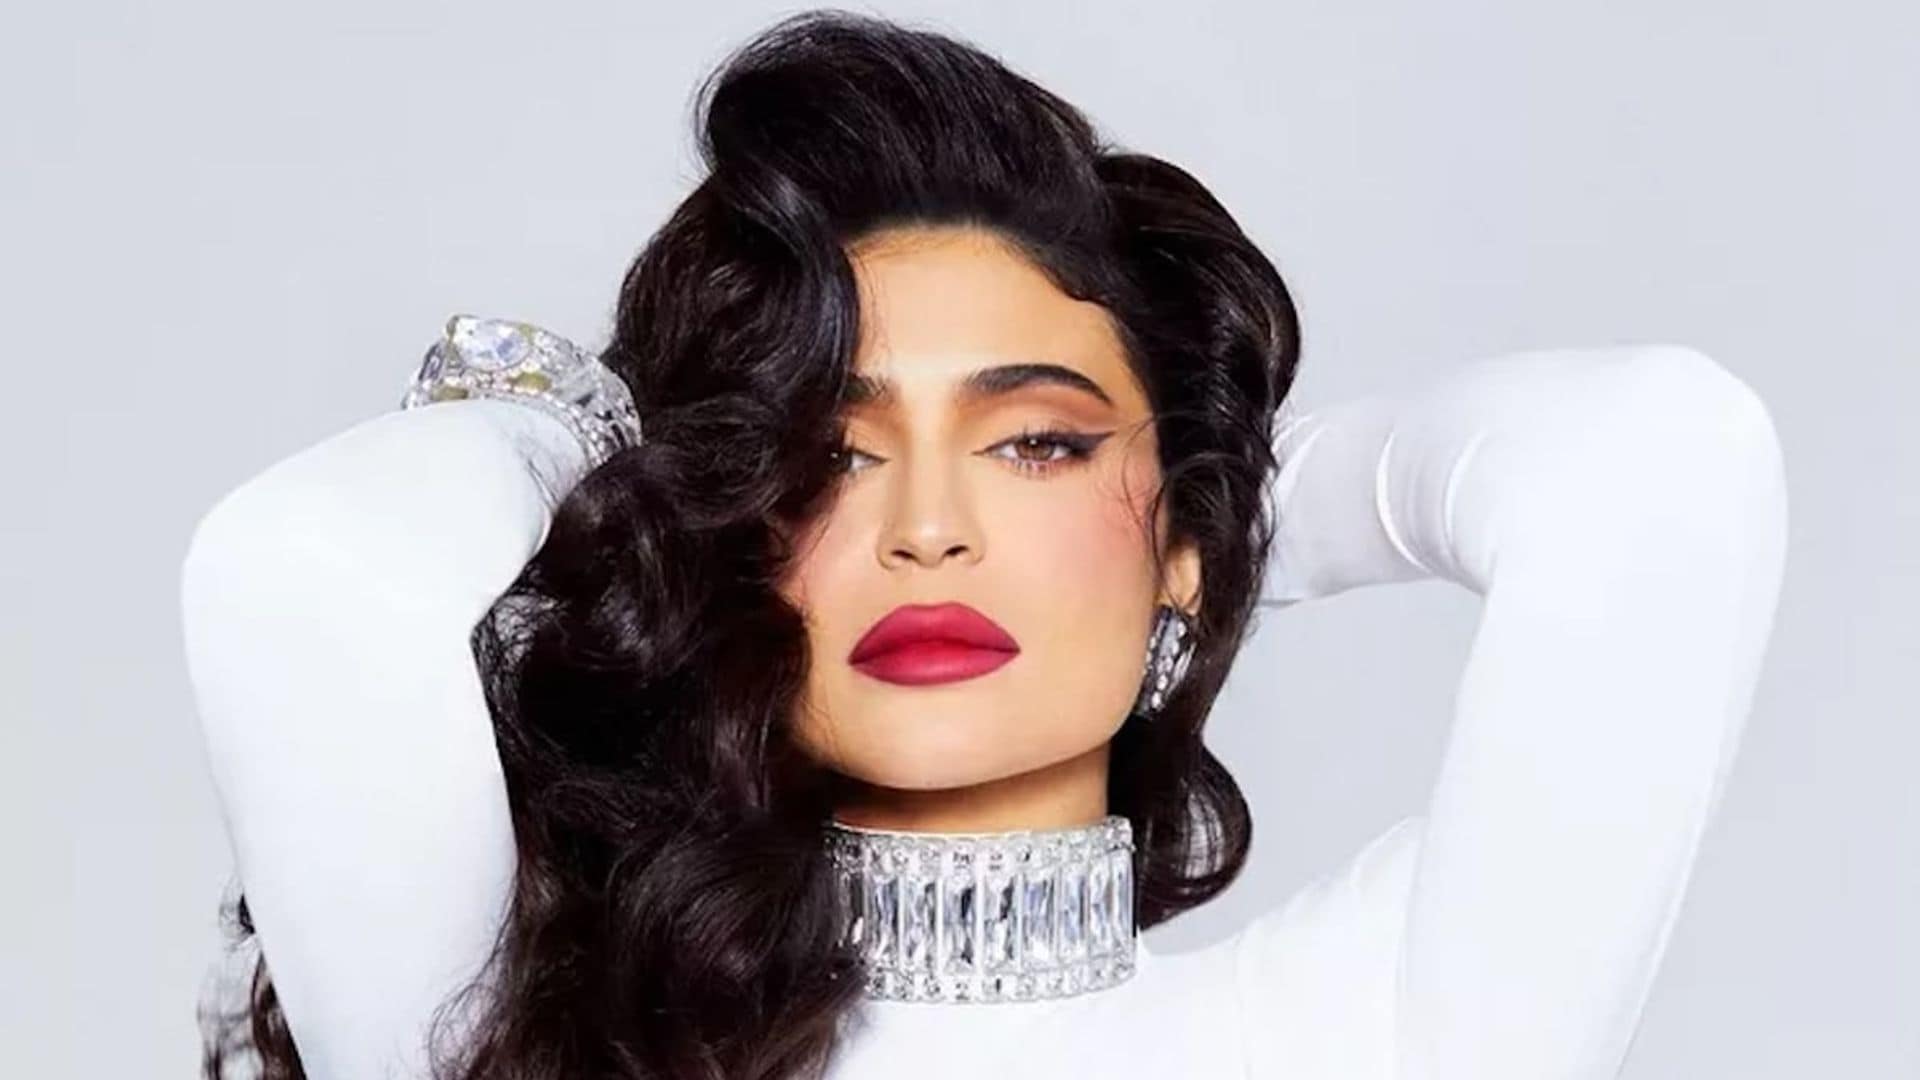 Kylie Jenner gives Old Hollywood glam in new photoshoot